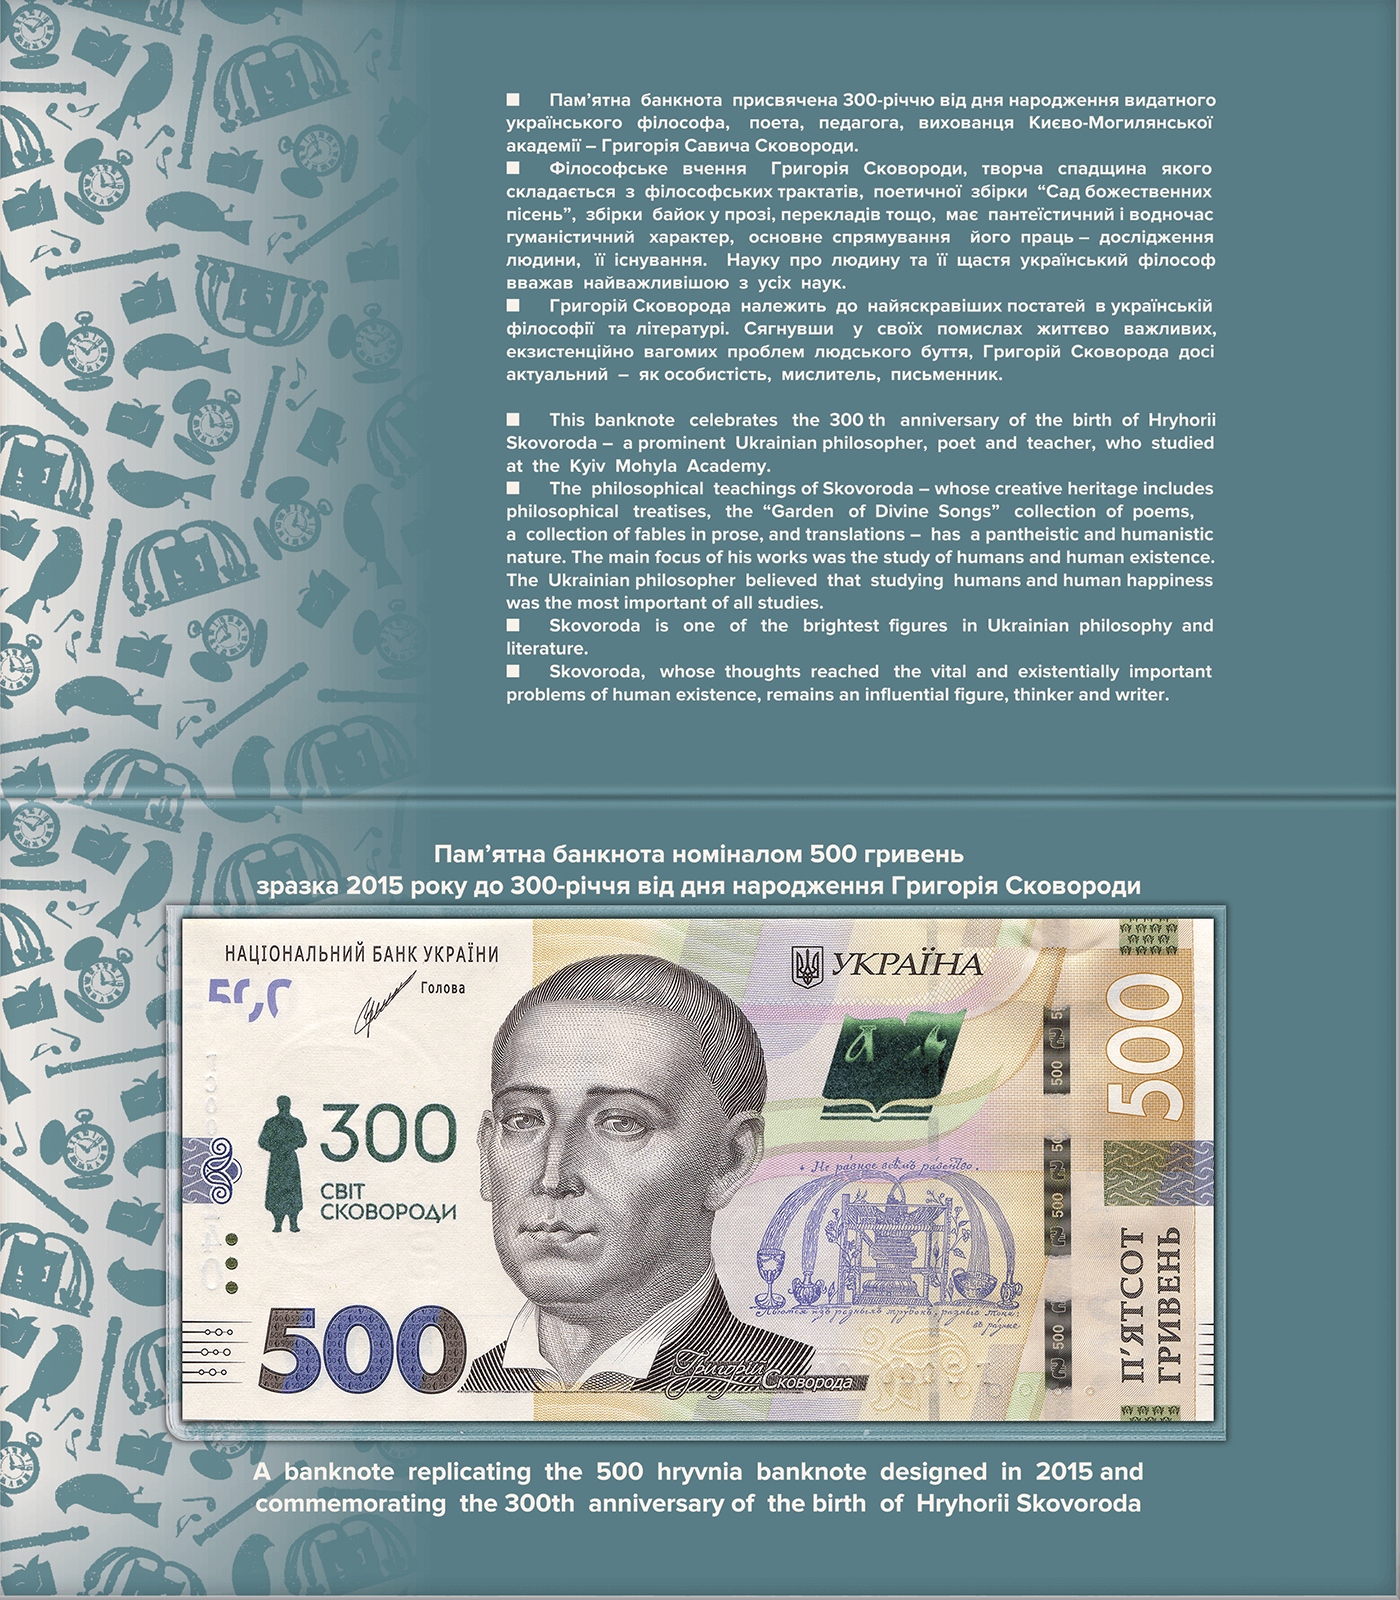 Banknote (in souvenir packaging) replicating the 500 hryvnia banknote designed in 2015 and commemorating the 300th anniversary of the birth of Hryhorii Skovoroda (reverse)